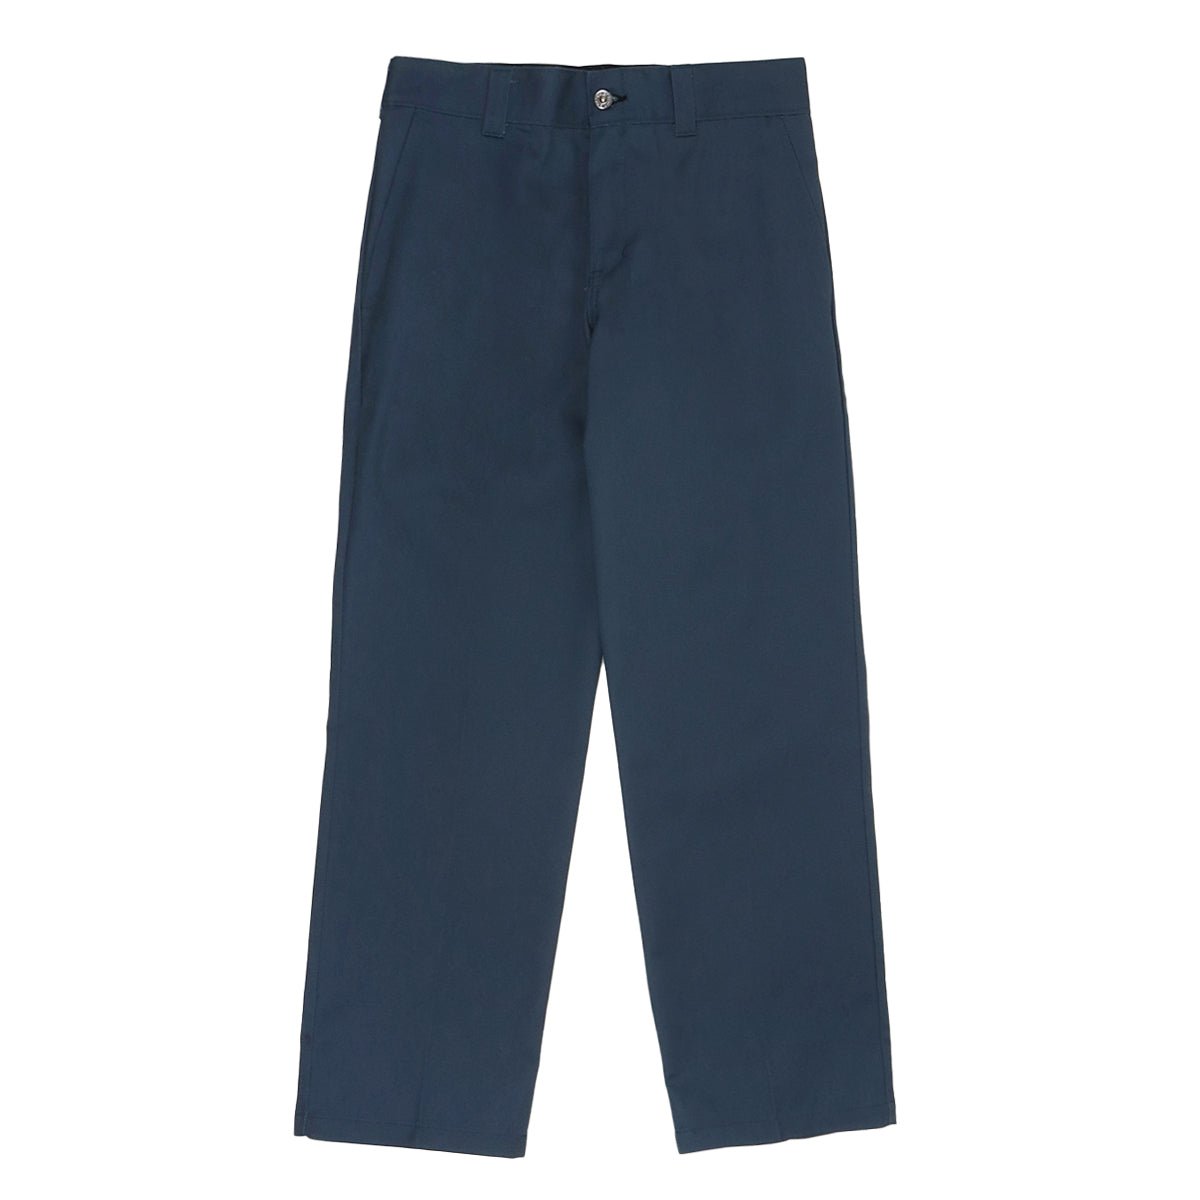 Skateboarding Twill Pants - Airforce Blue - Town City